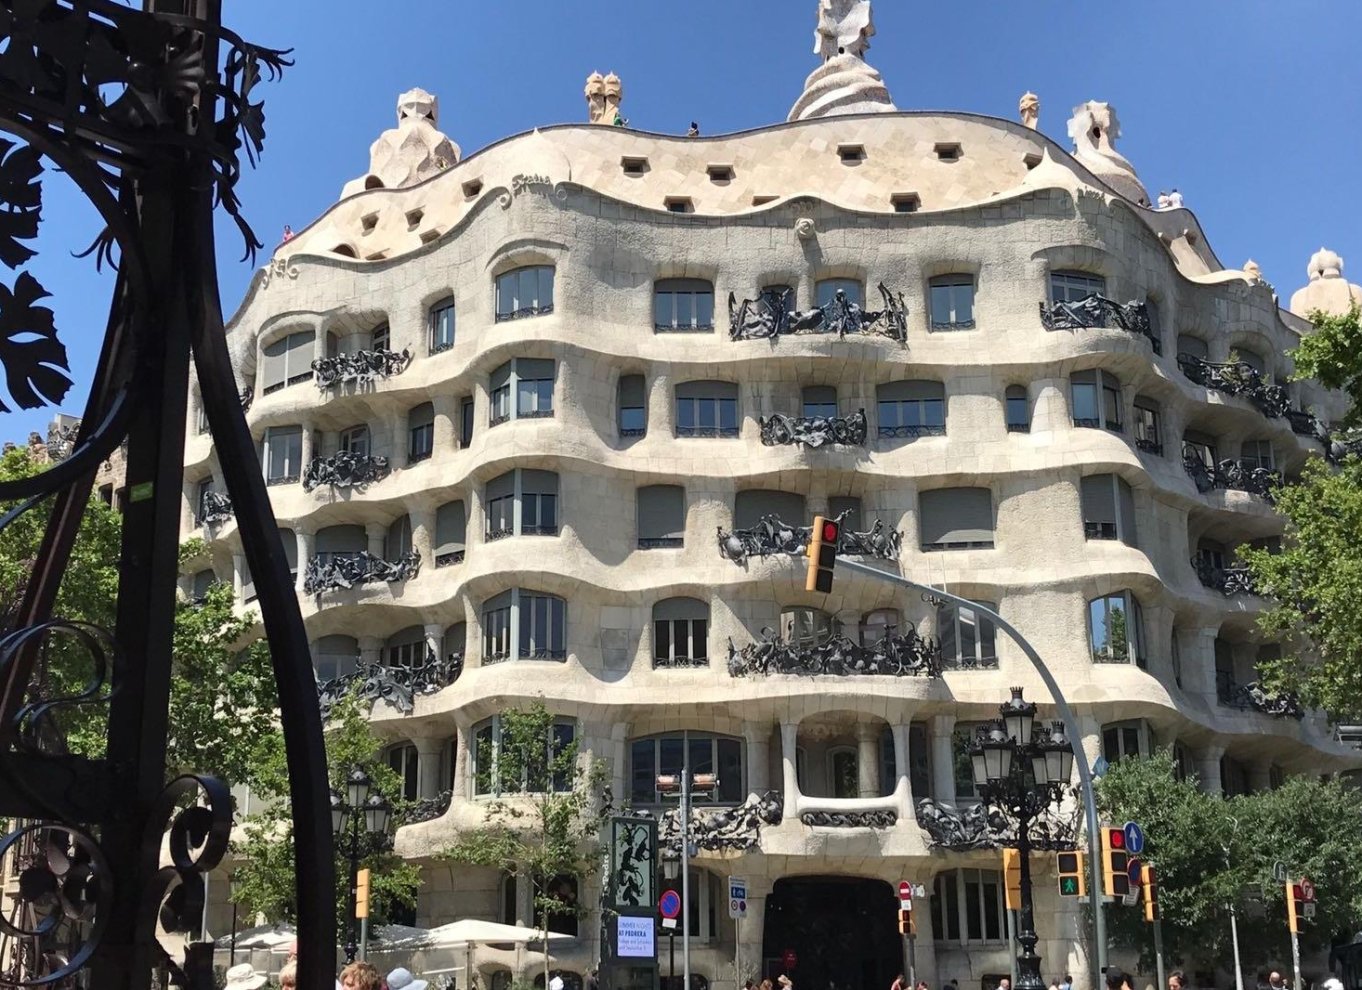 barcelona day trips from salou